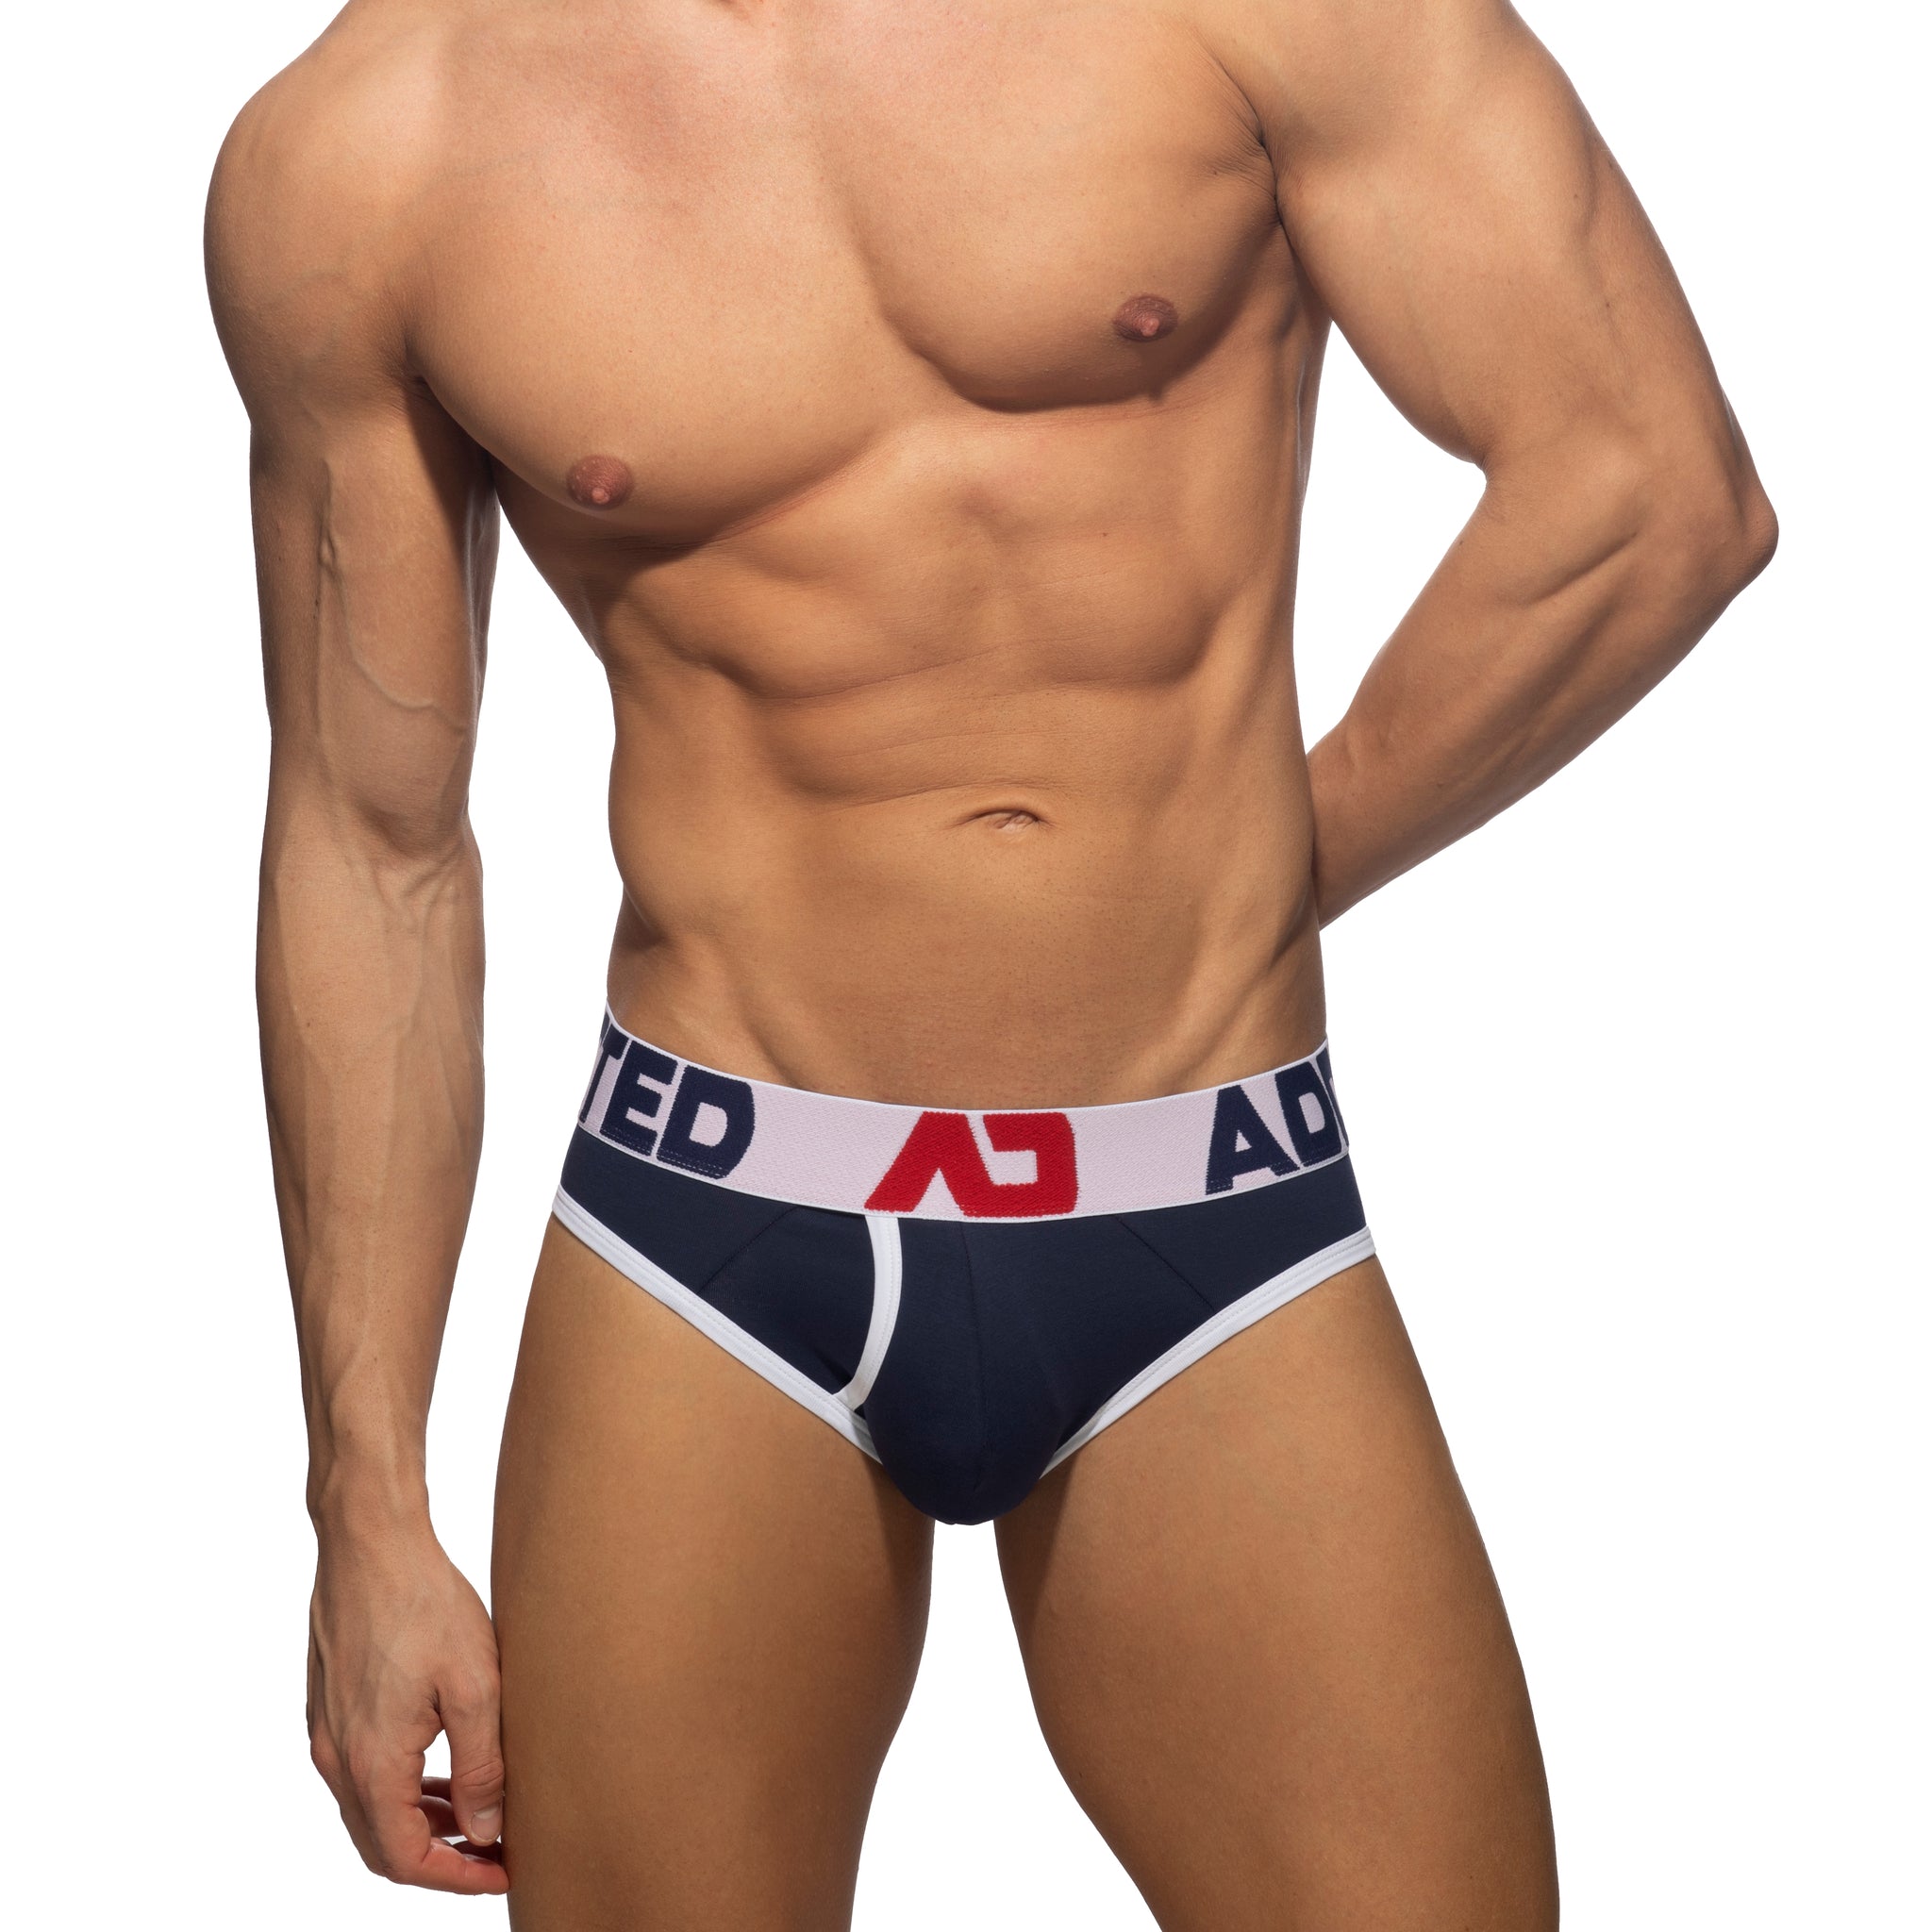 Addicted Open Fly Cotton Brief White AD1202